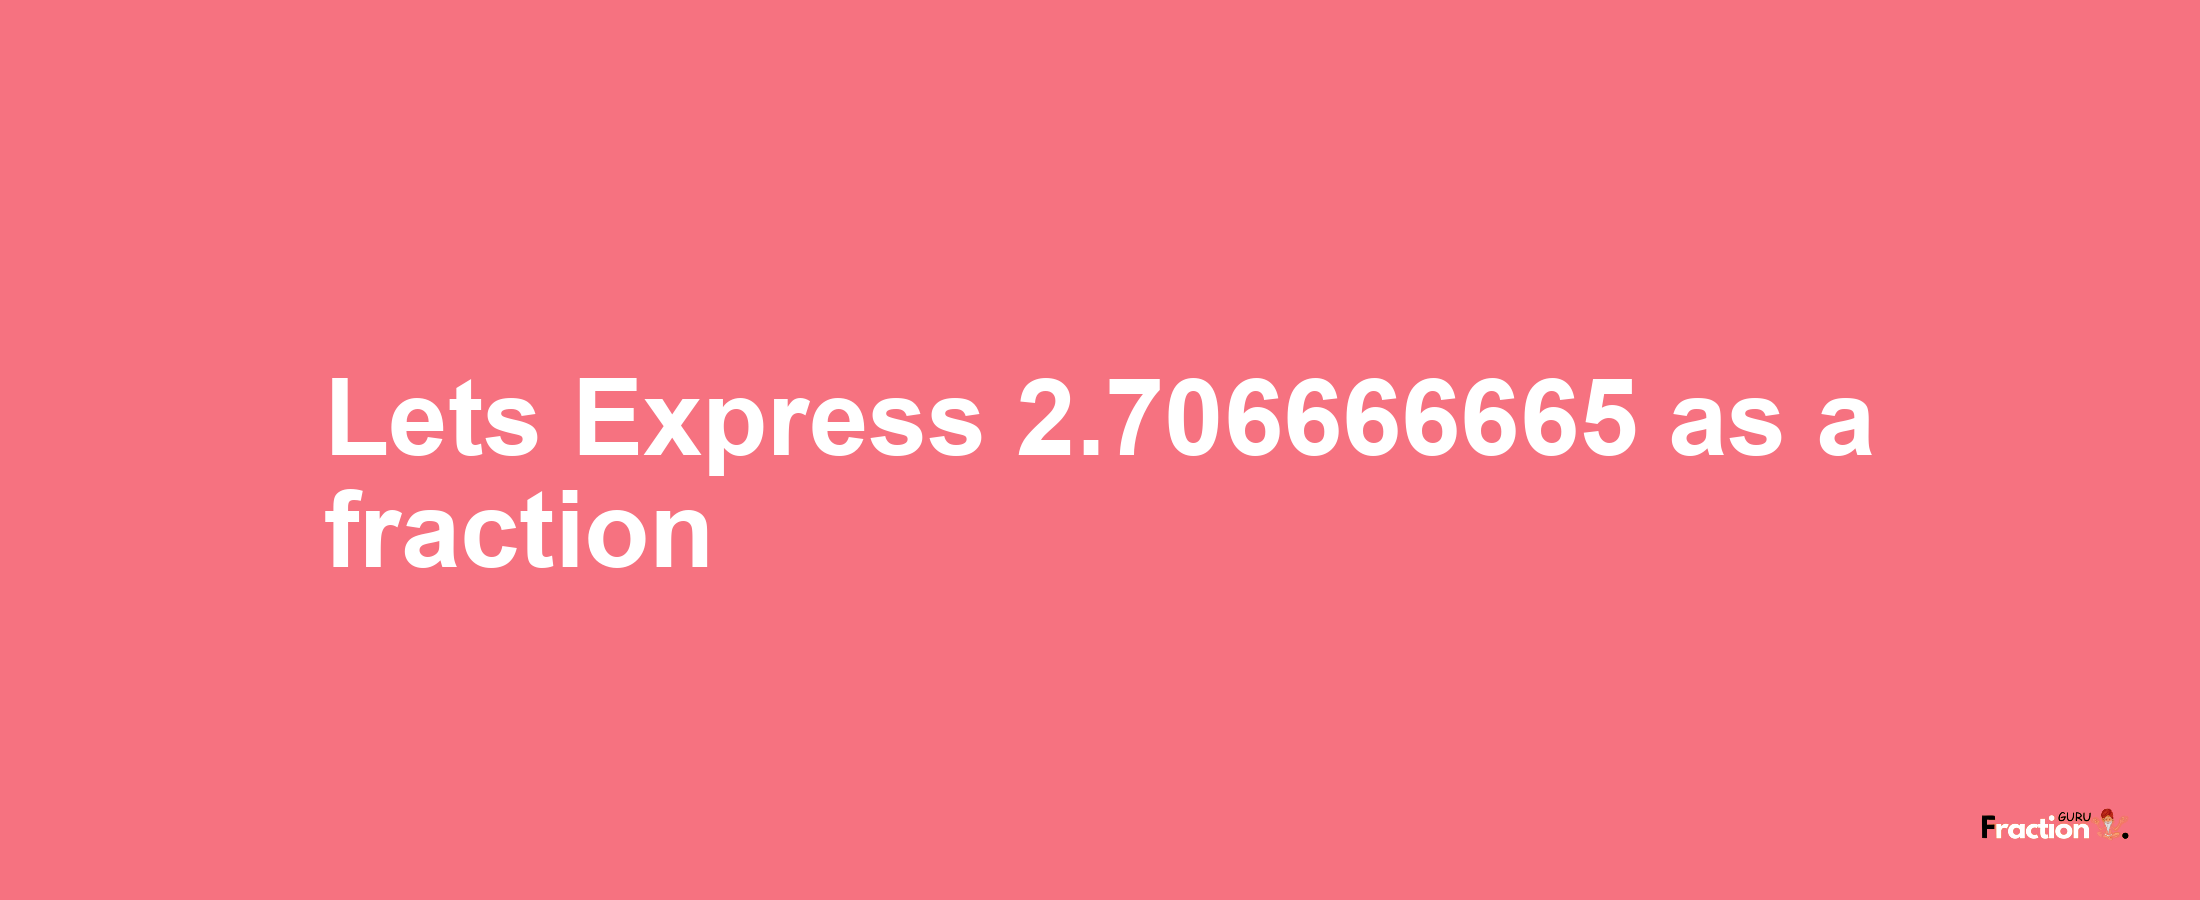 Lets Express 2.706666665 as afraction